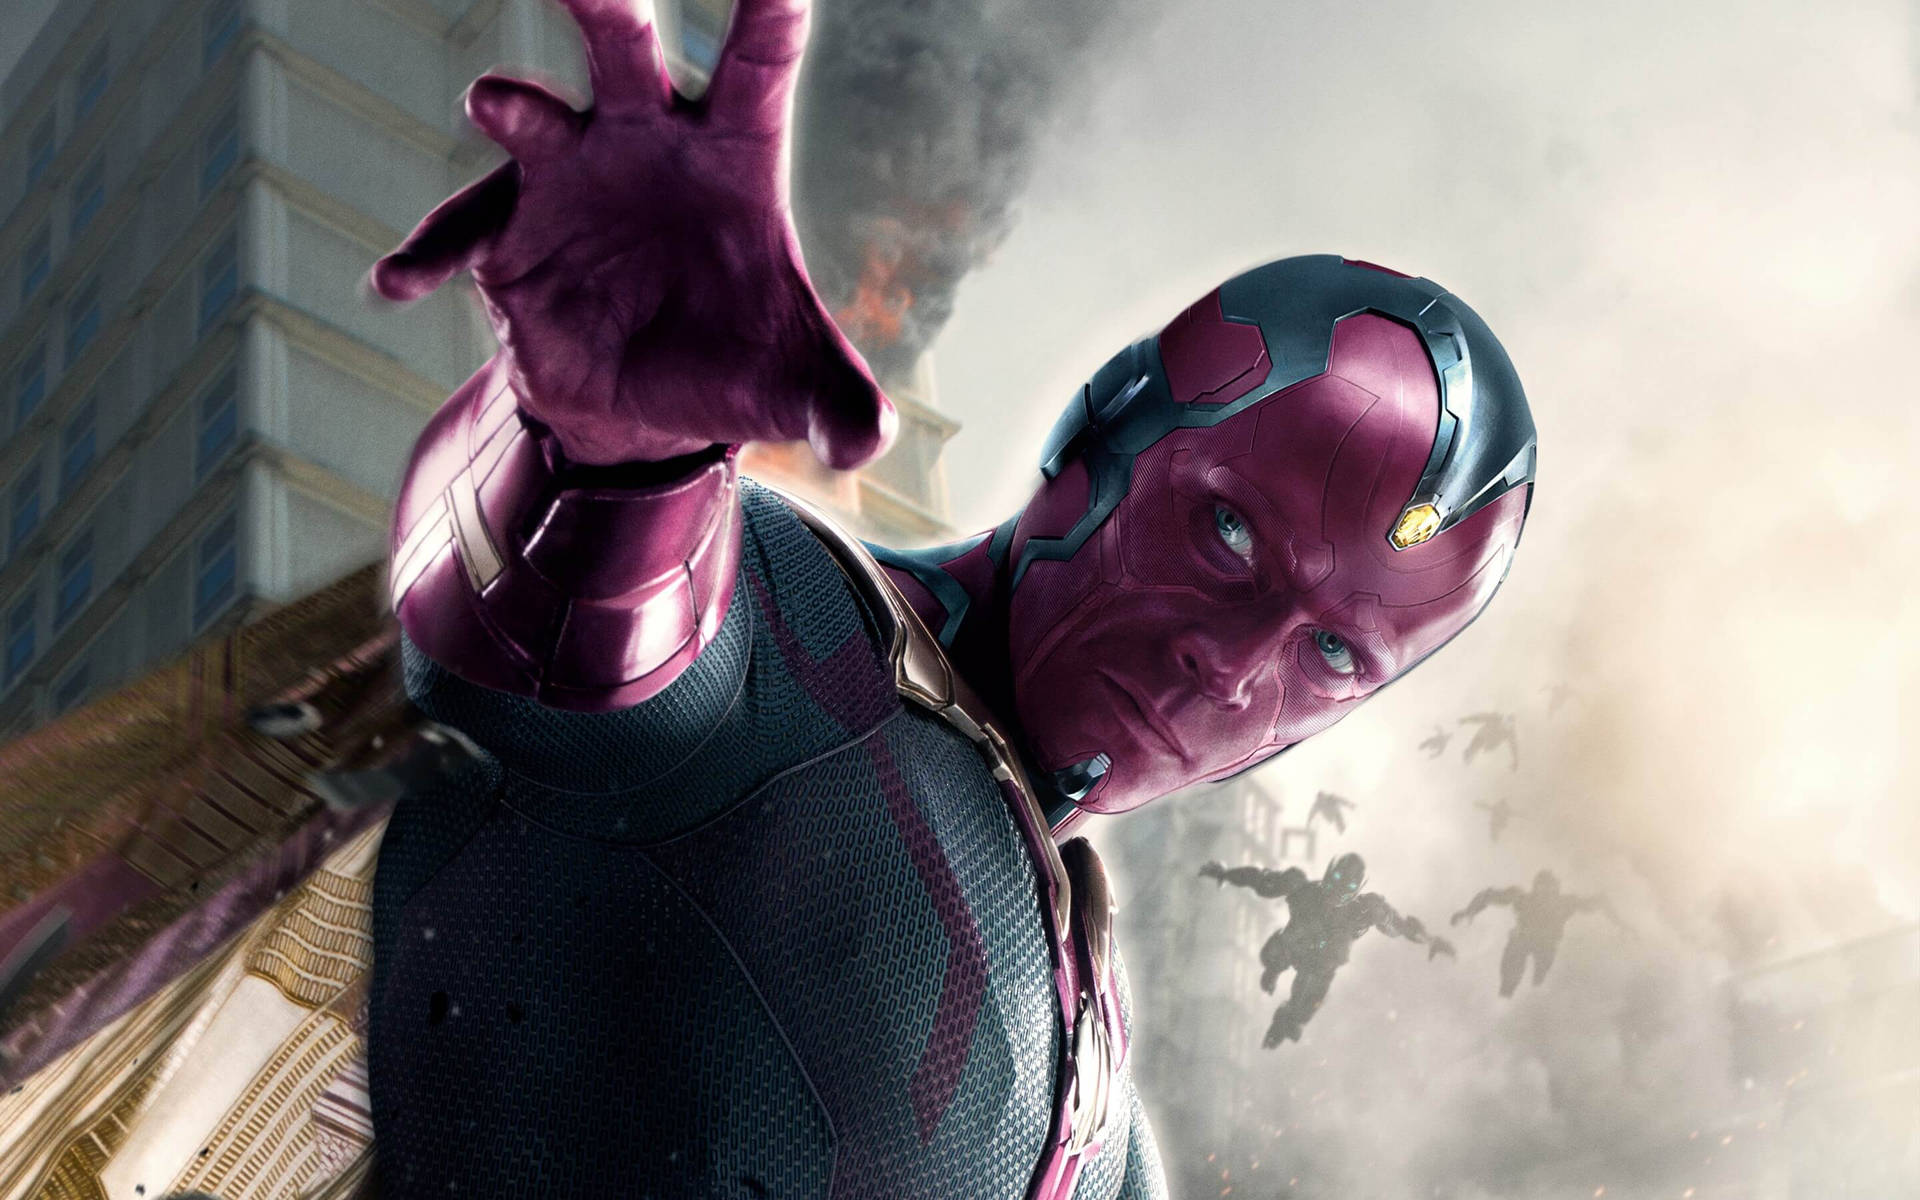 Paul Bettany Vision Im Marvel Cinematic Universe. Wallpaper